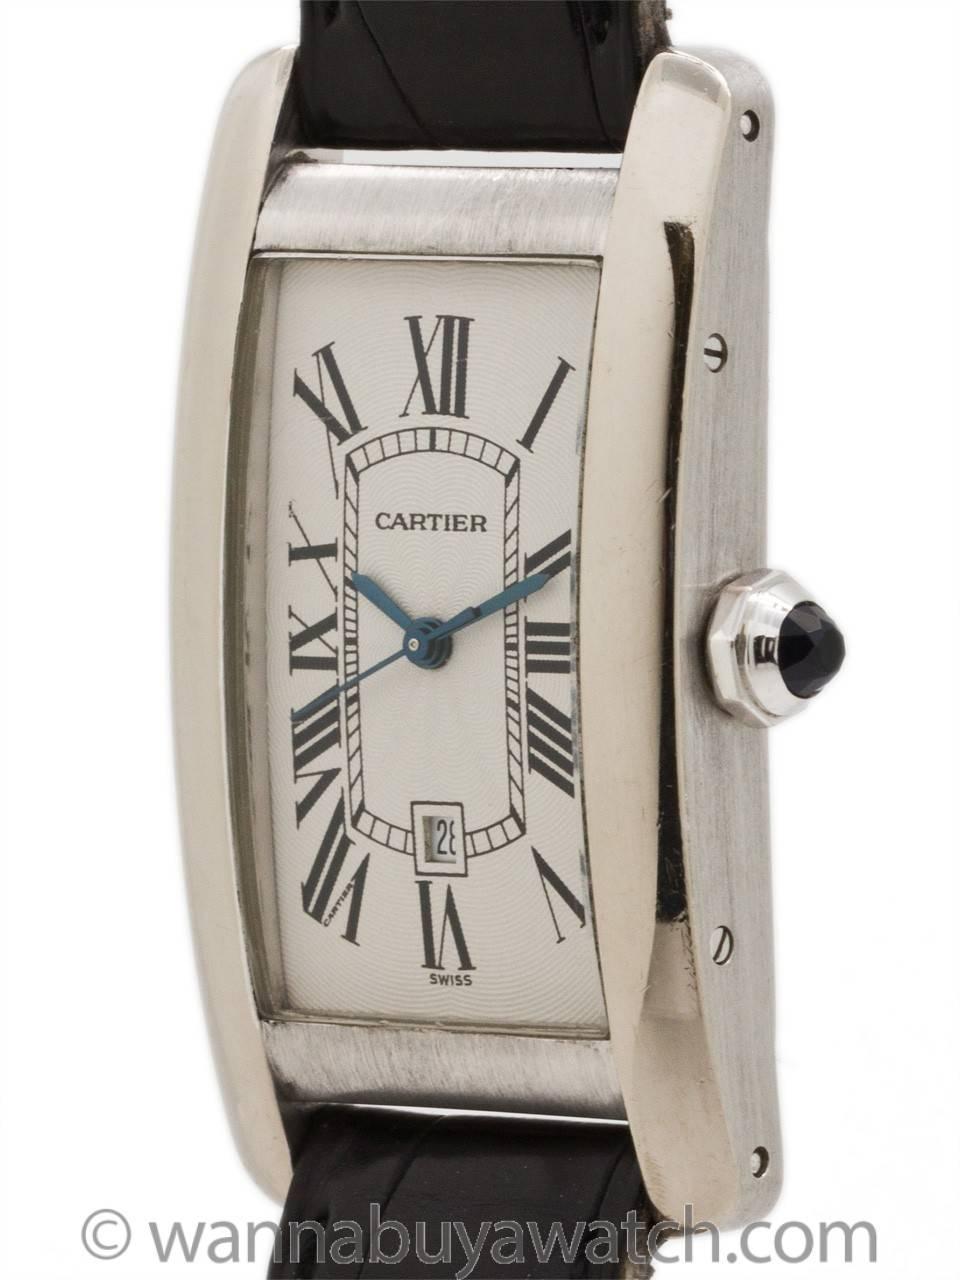 Cartier 18K white gold mid size Tank American ref# 1726 circa 1990s. Featuring classic curvex style 22 X 41mm case secured by 8 side screws and 4 caseback screws. Classic silvered dial with Roman figures including Cartier “secret” signature and